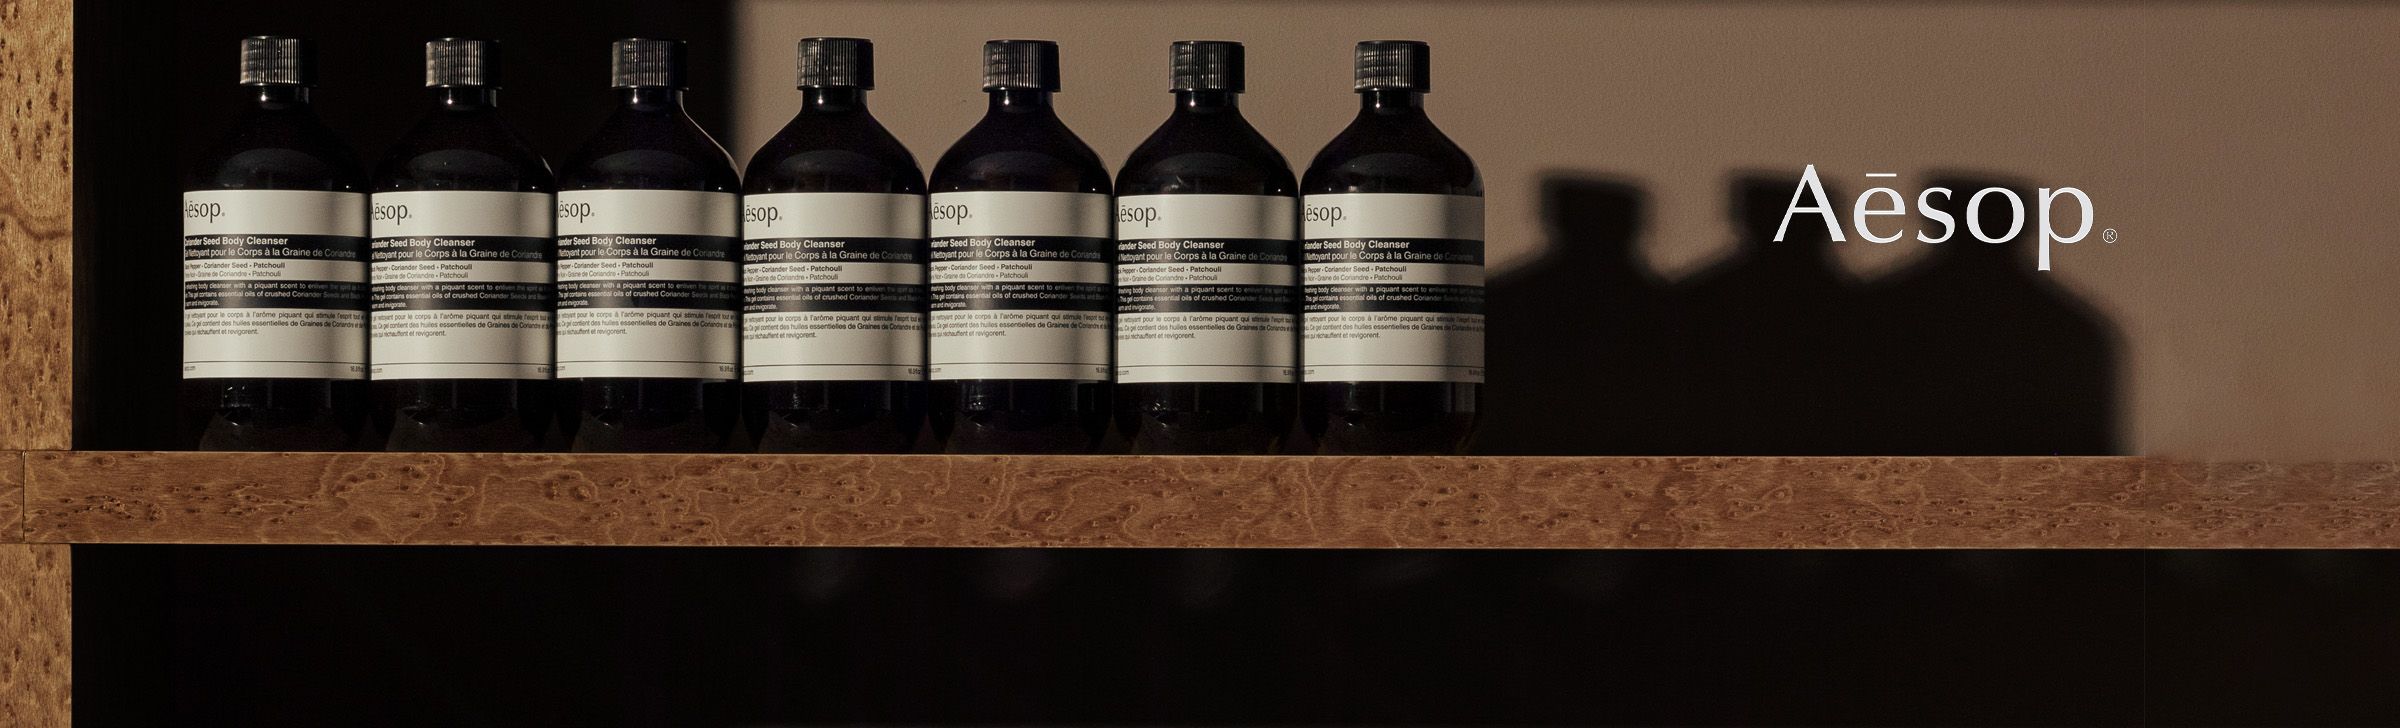 Aesop bottles, all aligned in a row